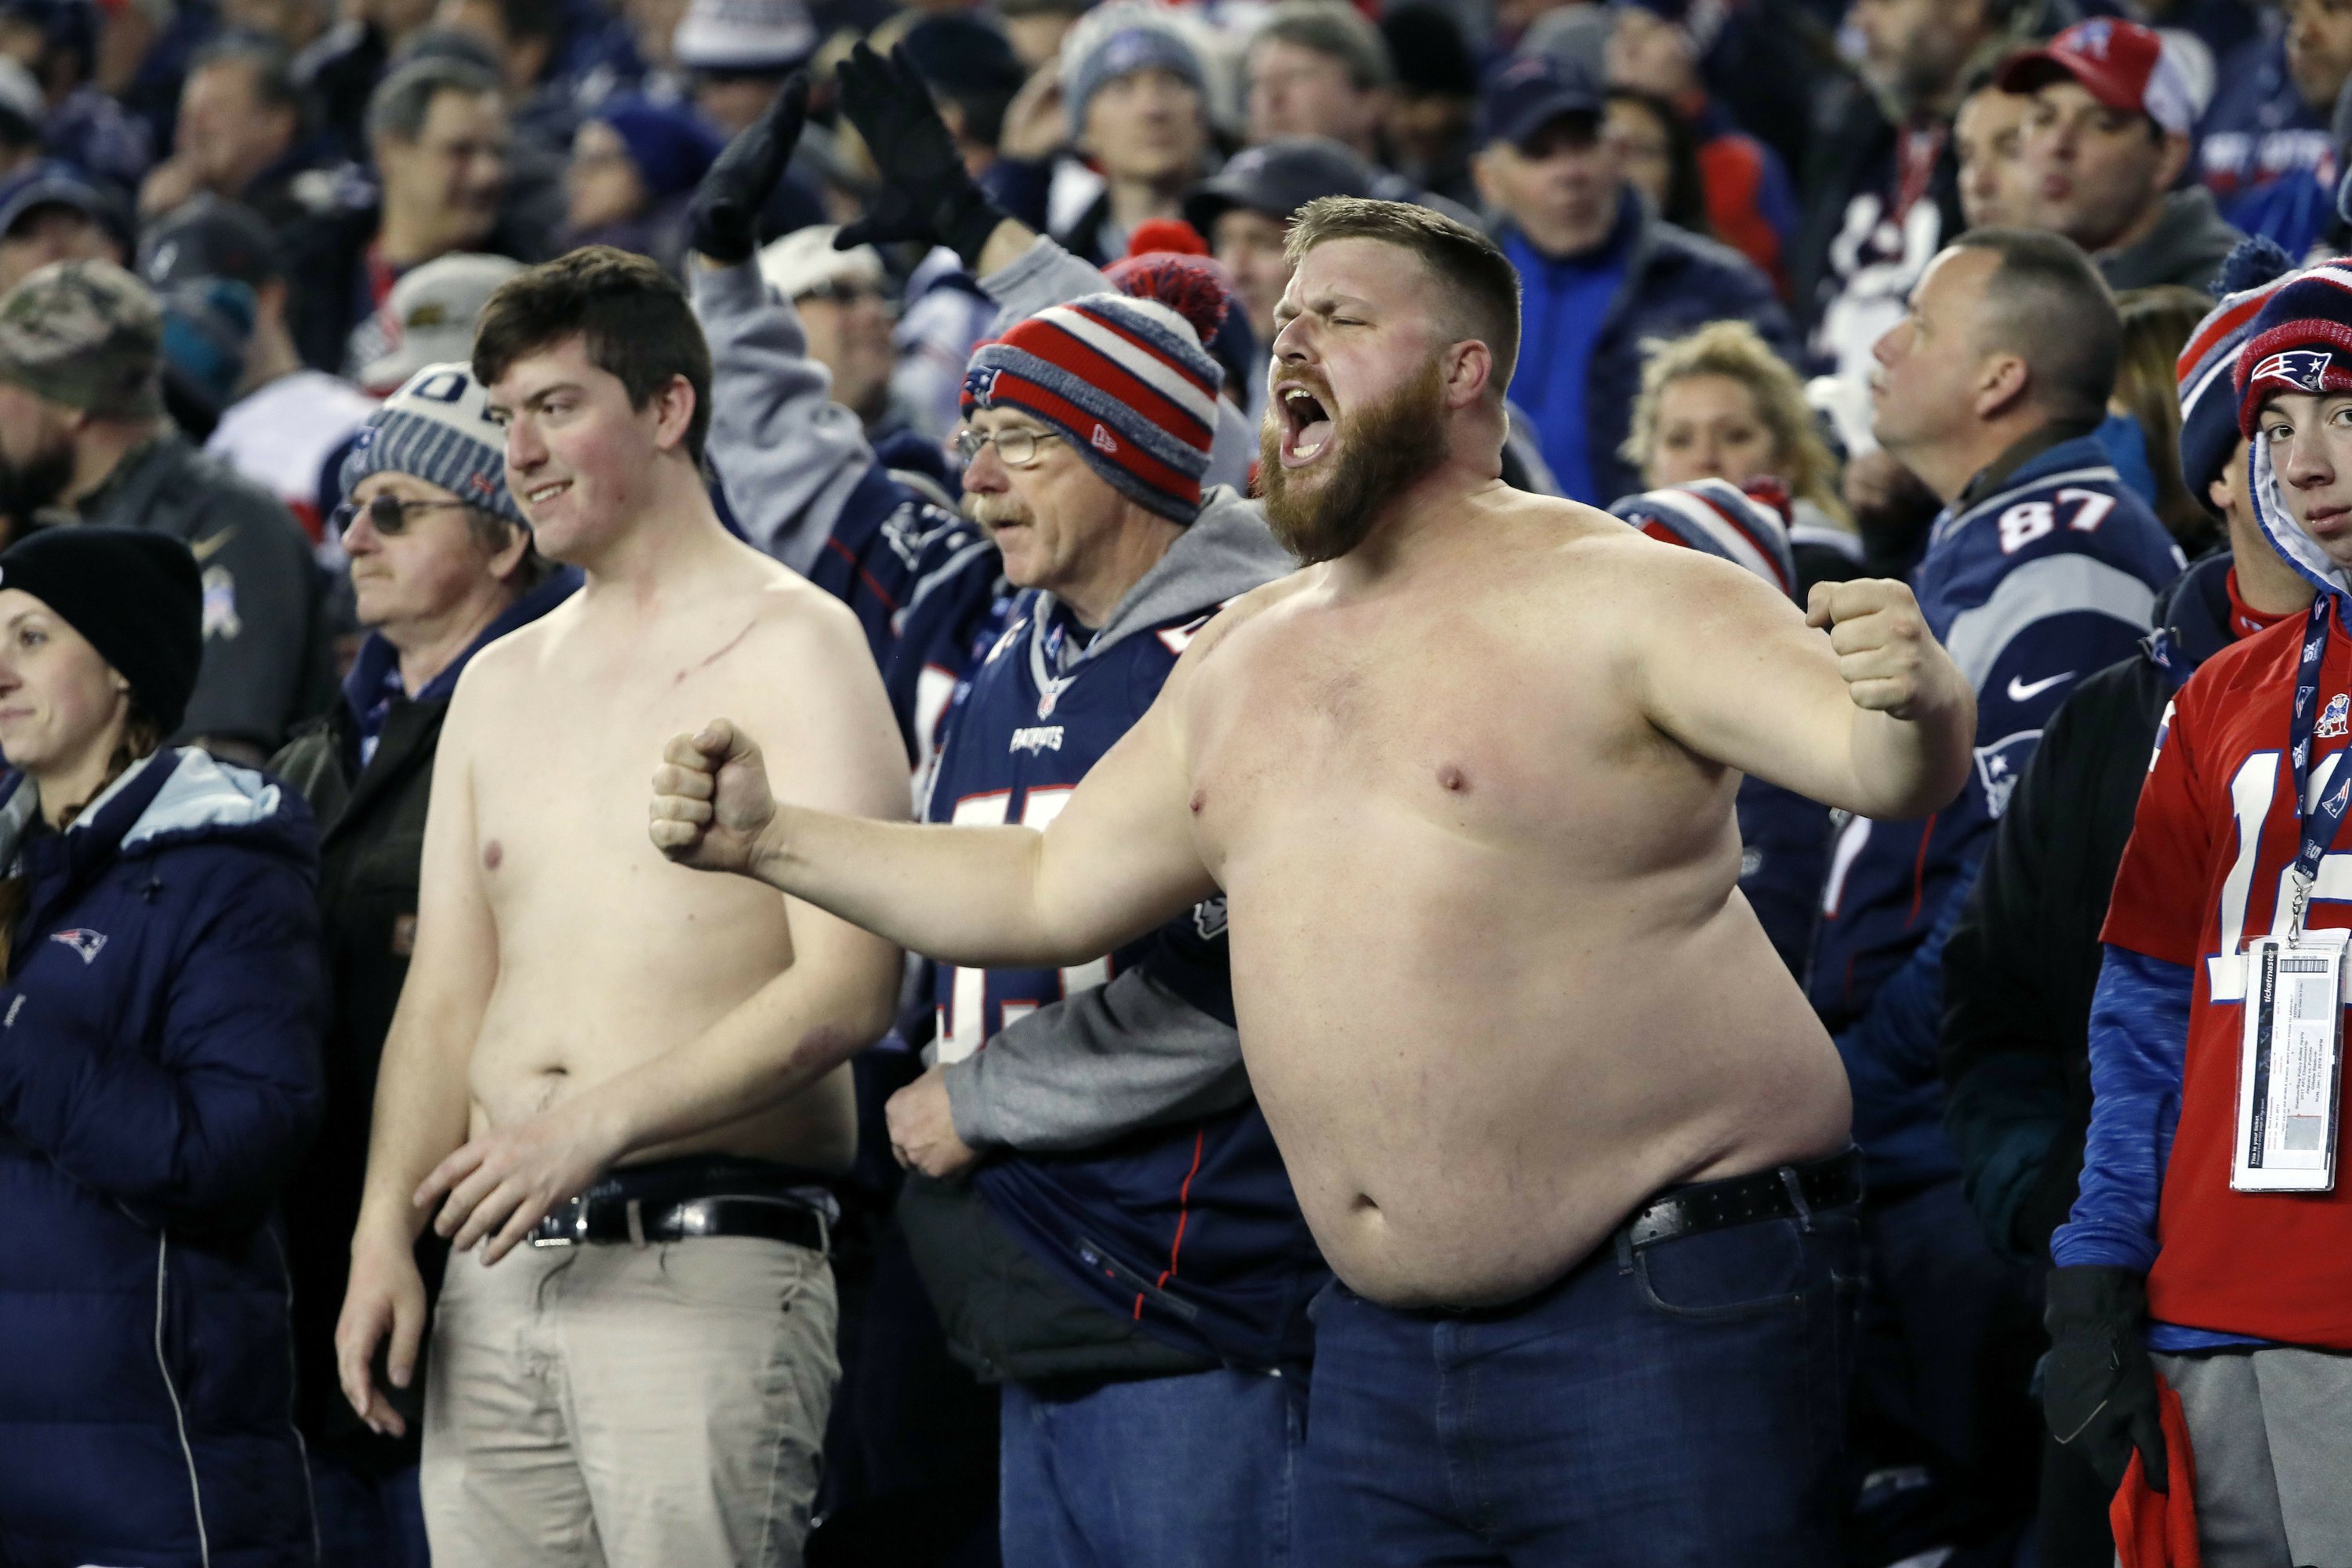 Fans Behaving Badly Pats, Eagles bring out worst in fans AP News